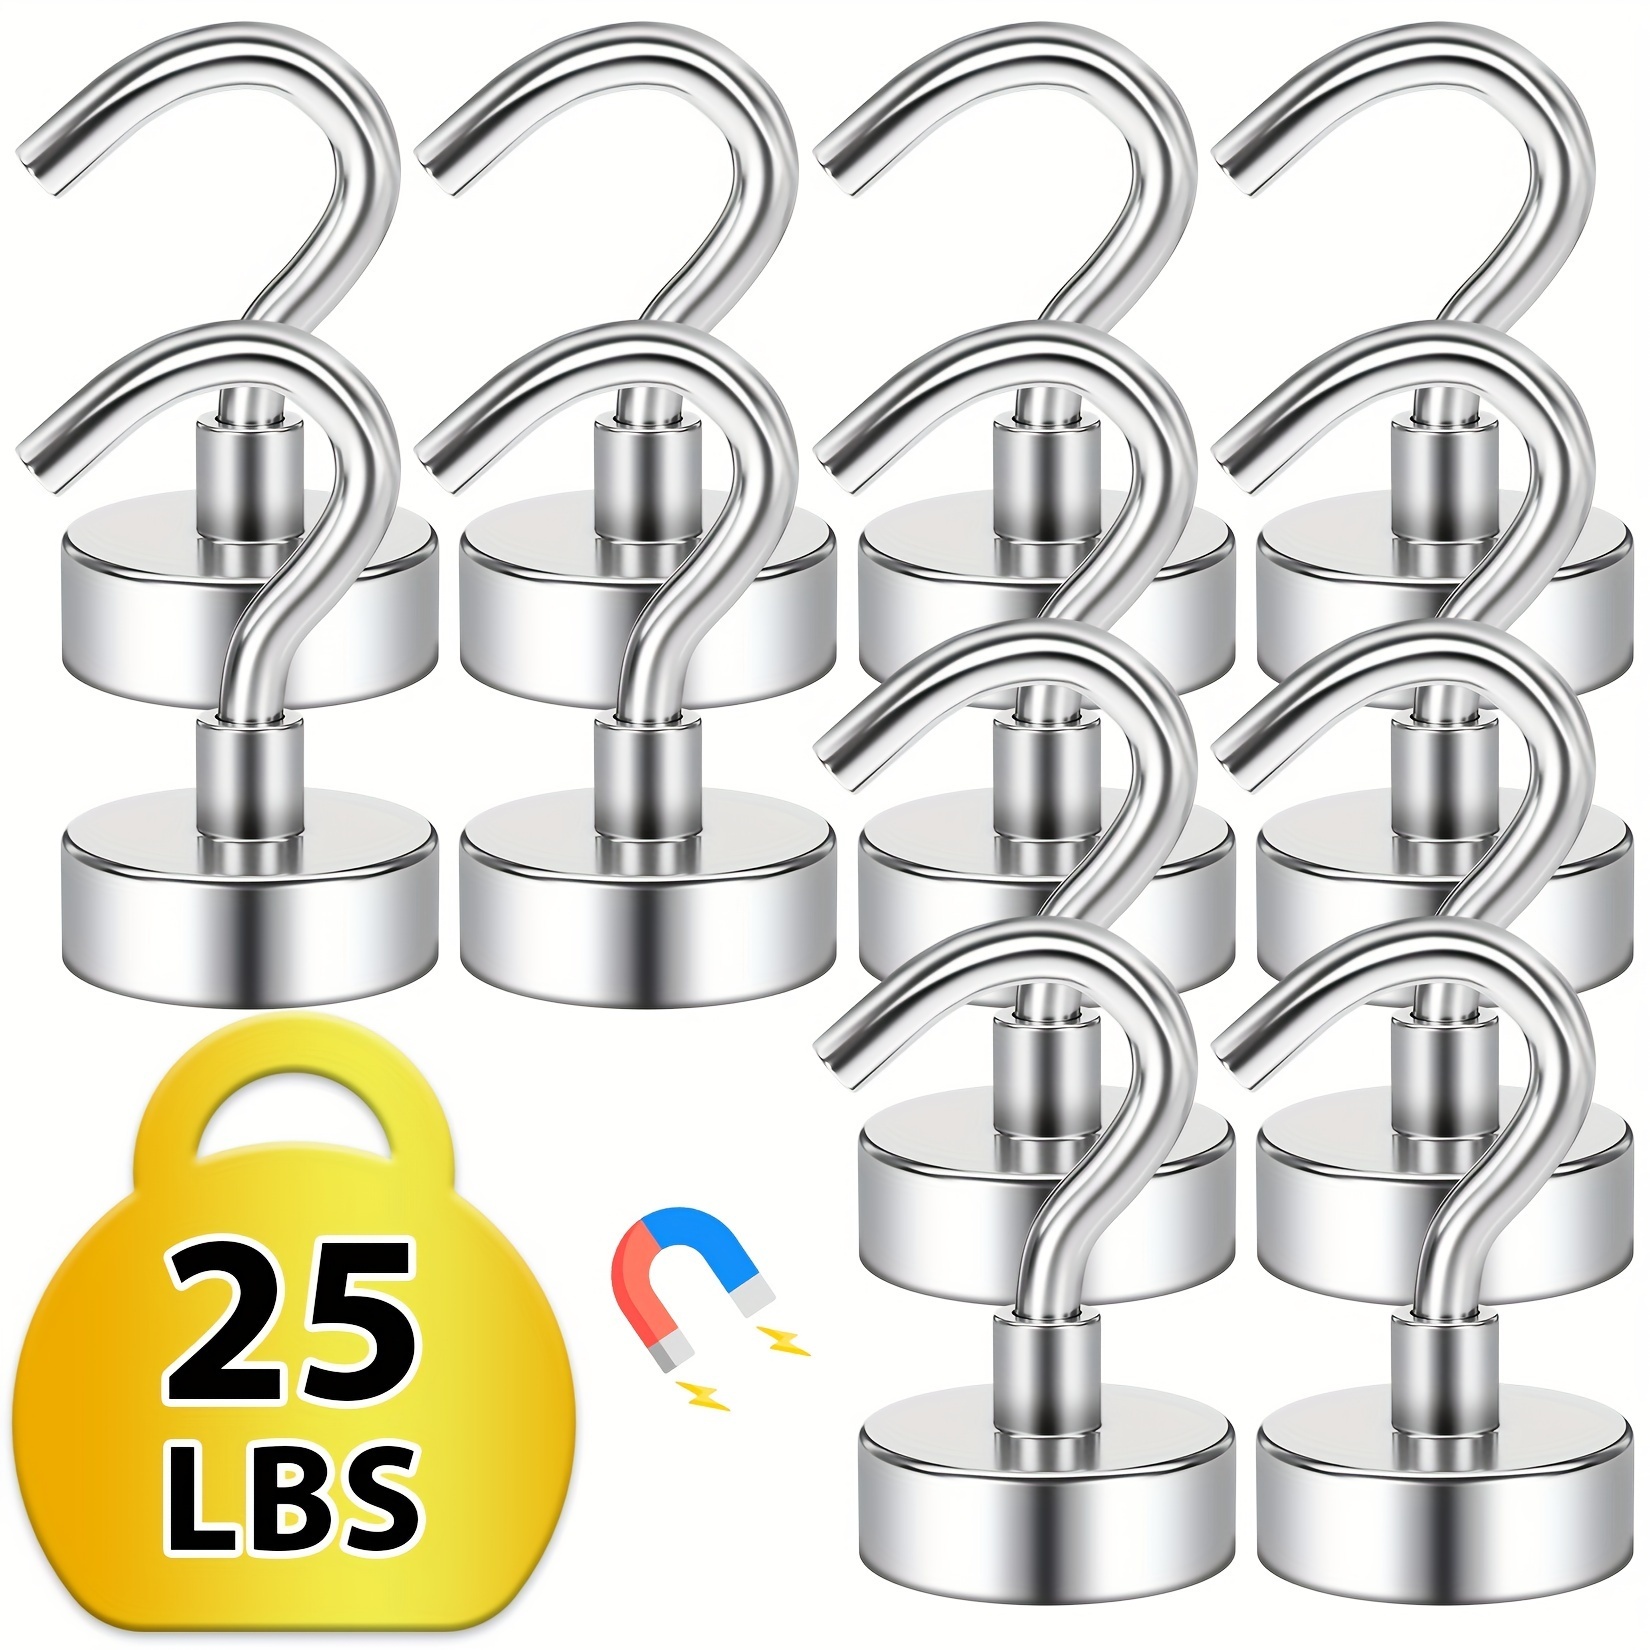 

3/6/12pcs, Heavy Duty Neodymium Magnet Hooks For Hanging, Refrigerator Magnets Round Metal - Strong 25lbs Magnets For Fridge, Home, Kitchen, Industry, Workplace, And Office